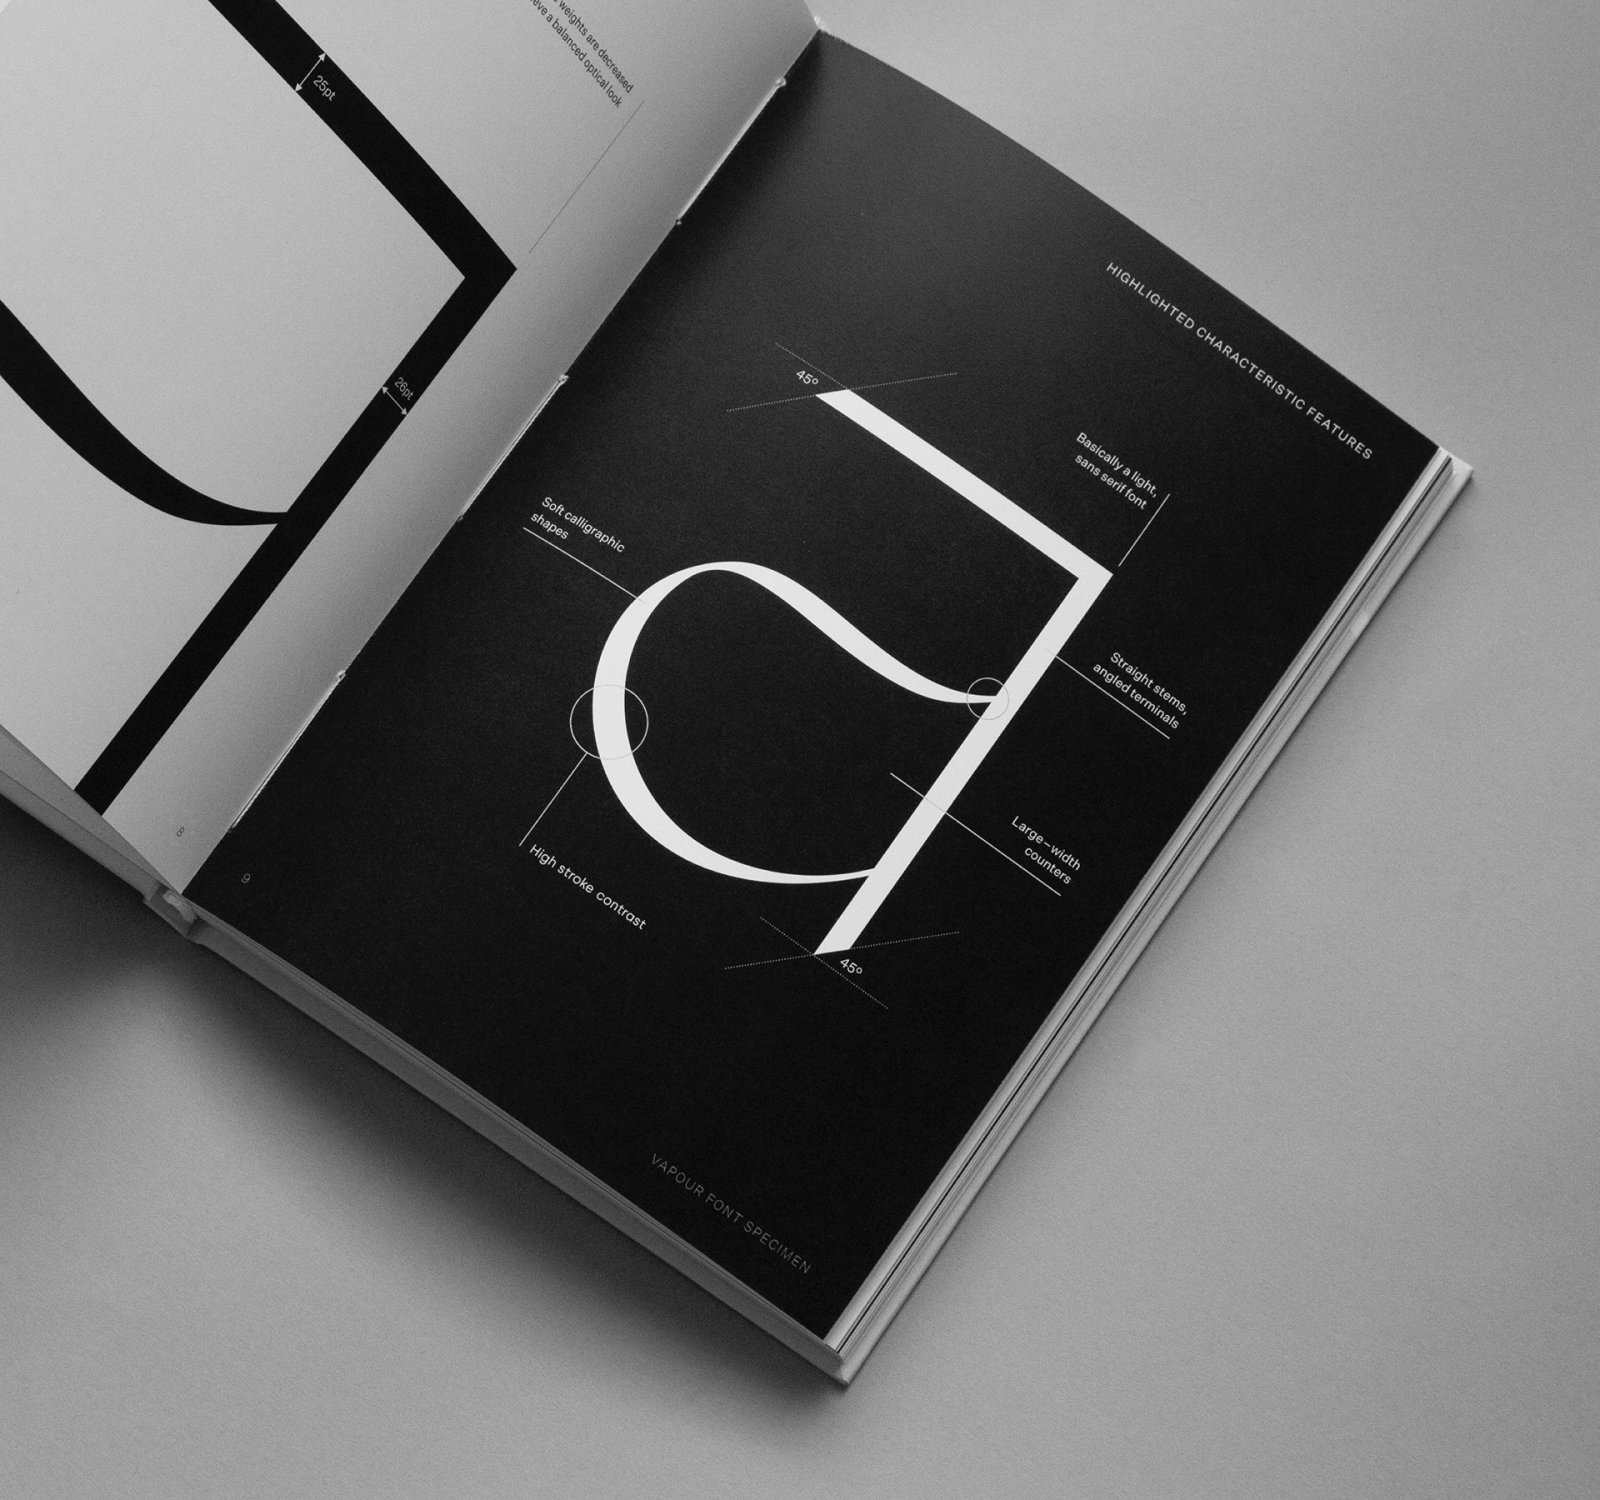 Graceful Vapour Typeface Inspired by Calligraphy by Anna Takács